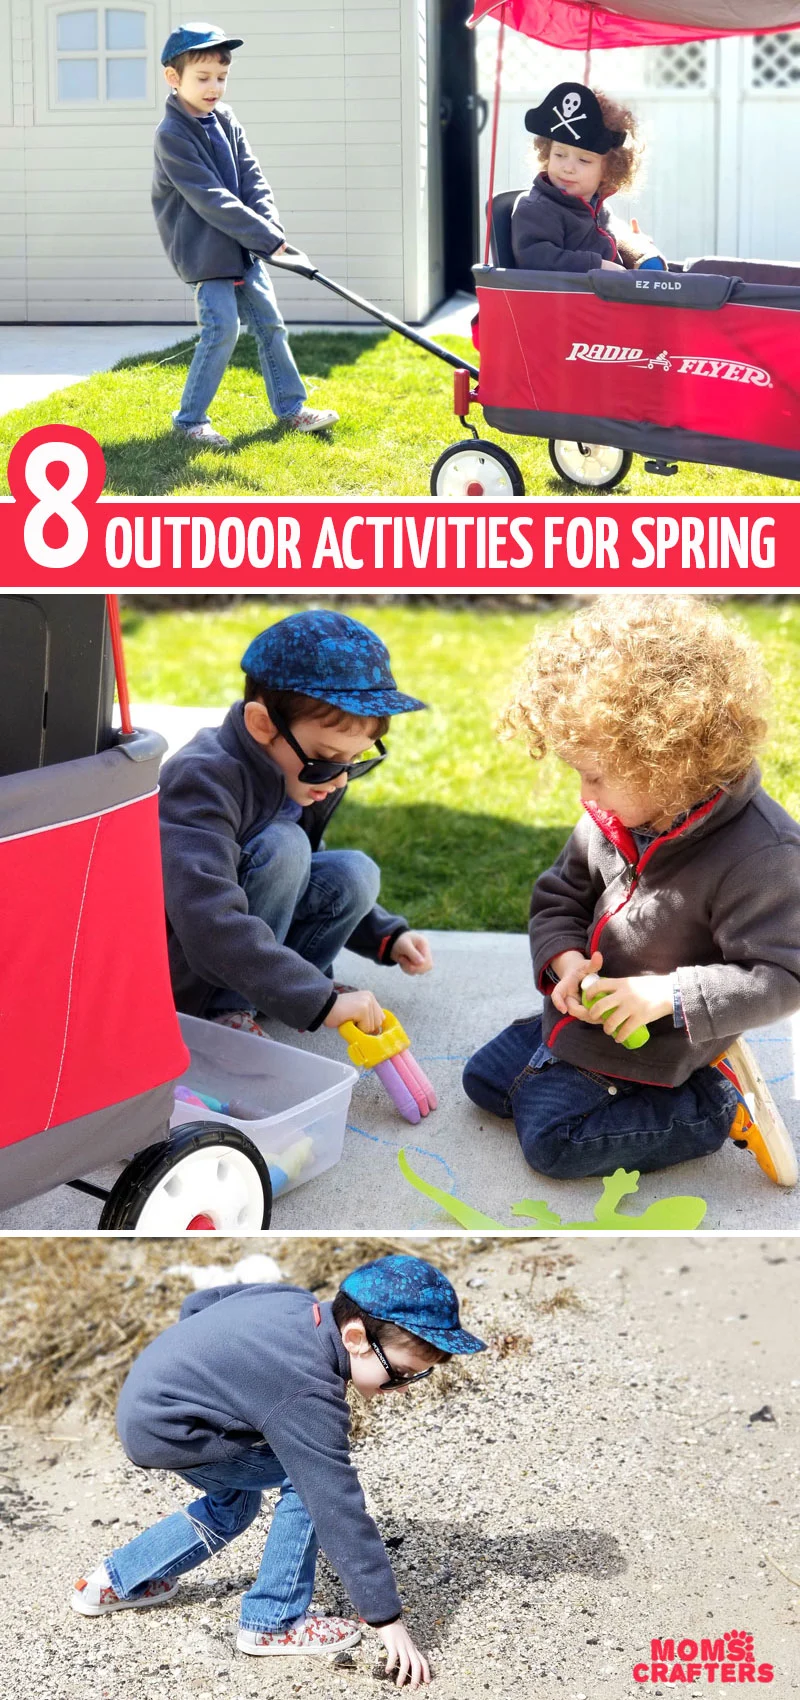 Looking for some cool outdoor activities for spring for toddlers and preschoolers? These fun learning and crafting ideas to do outside can be done in chilly weather too!